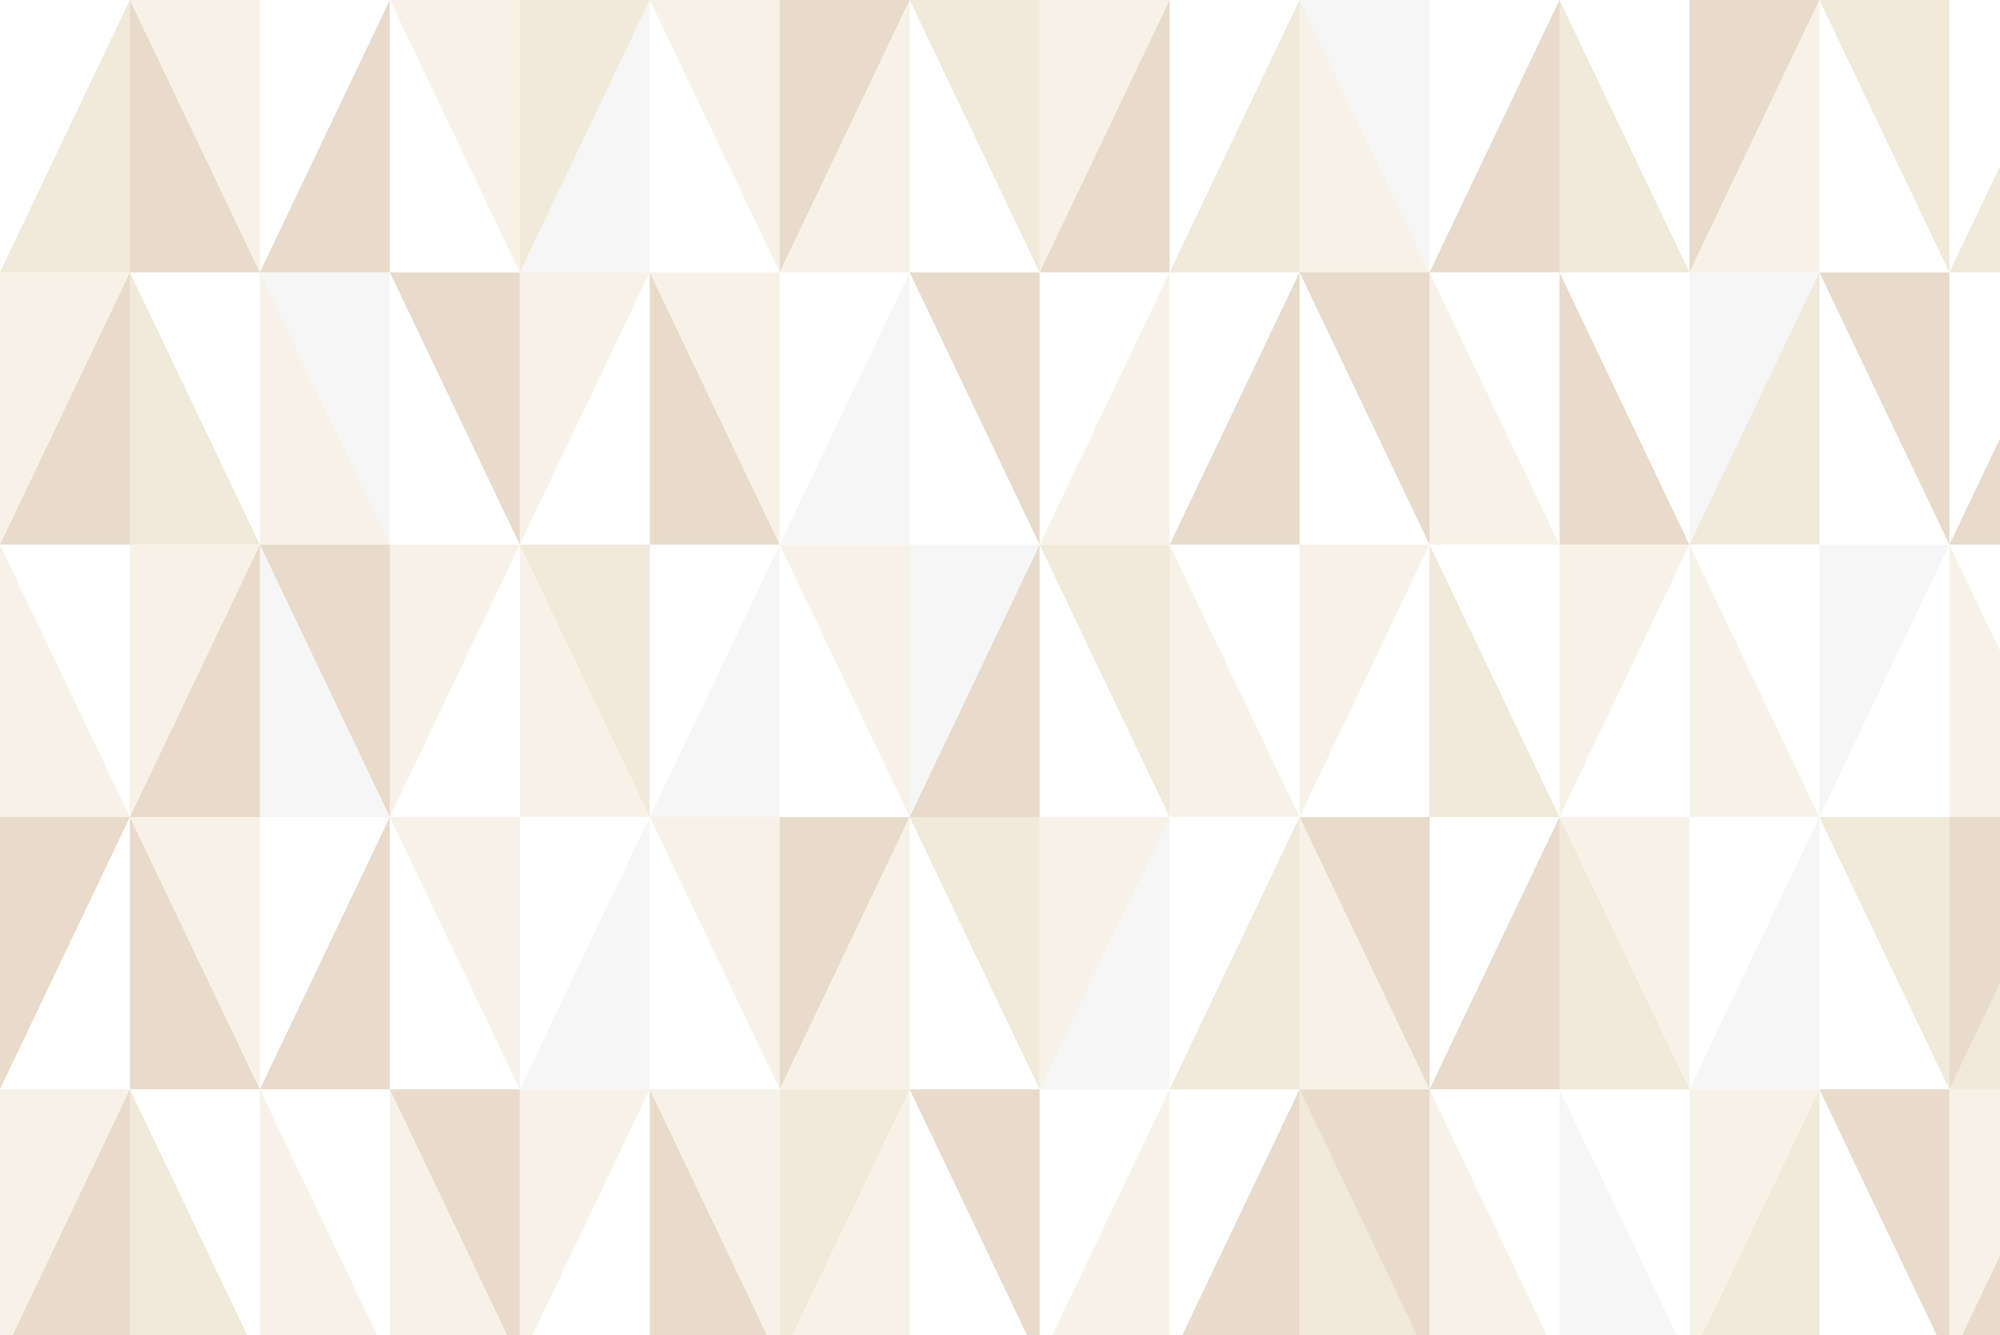             Design wall mural with small triangles grey on premium smooth non-woven
        